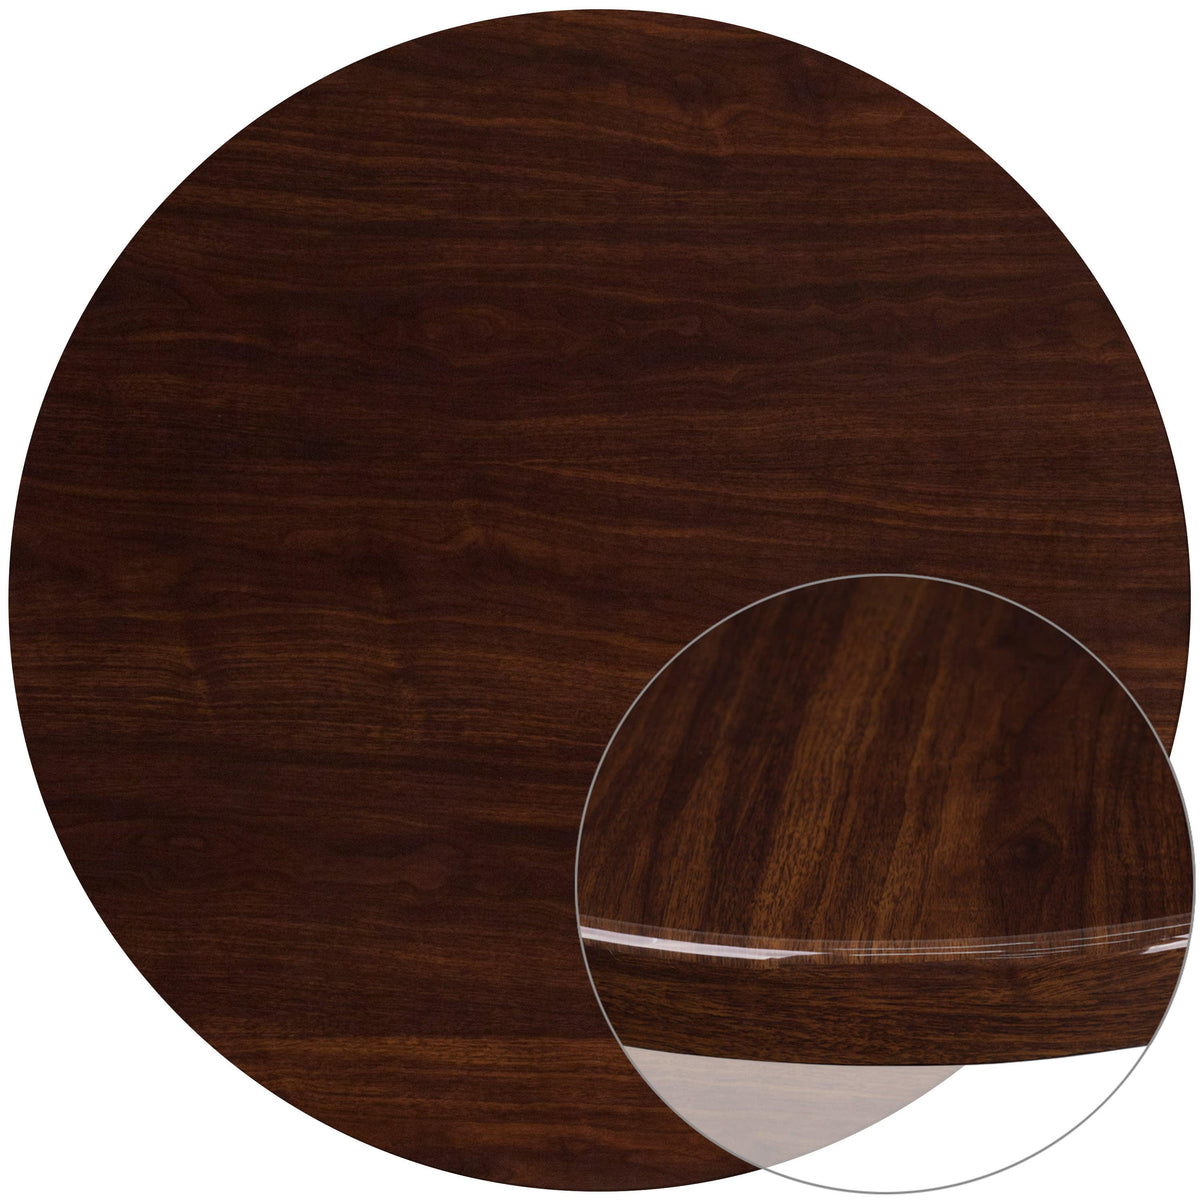 Walnut |#| 48inch Round High-Gloss Walnut Resin Table Top with 2inch Thick Drop-Lip